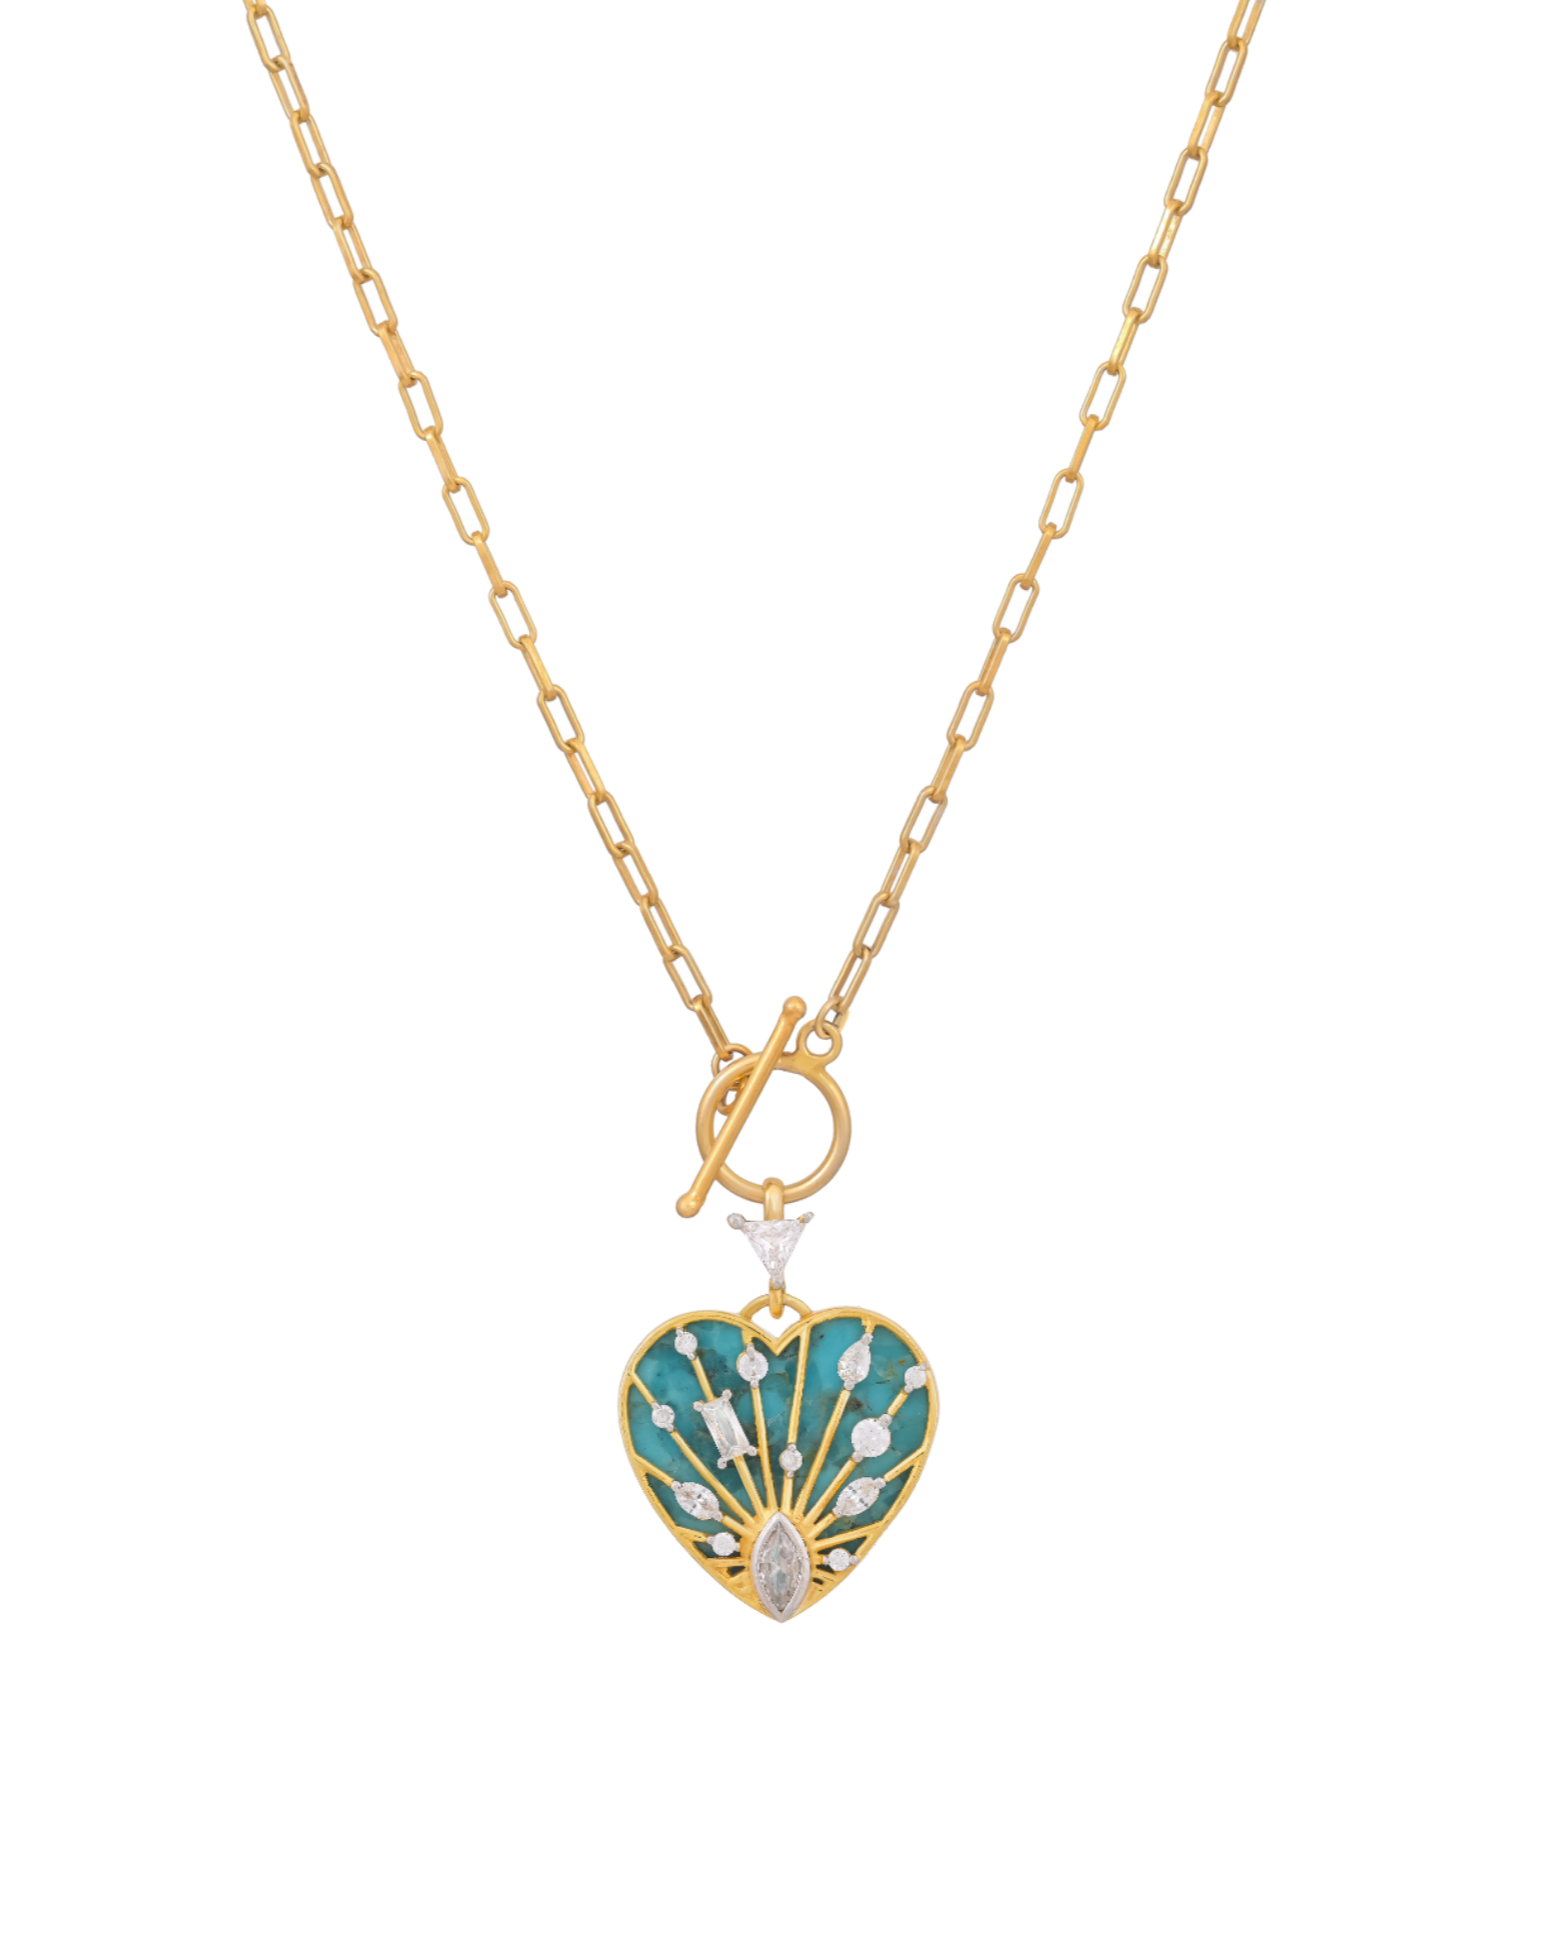 Glow Radiance Heart Pendant With Chain